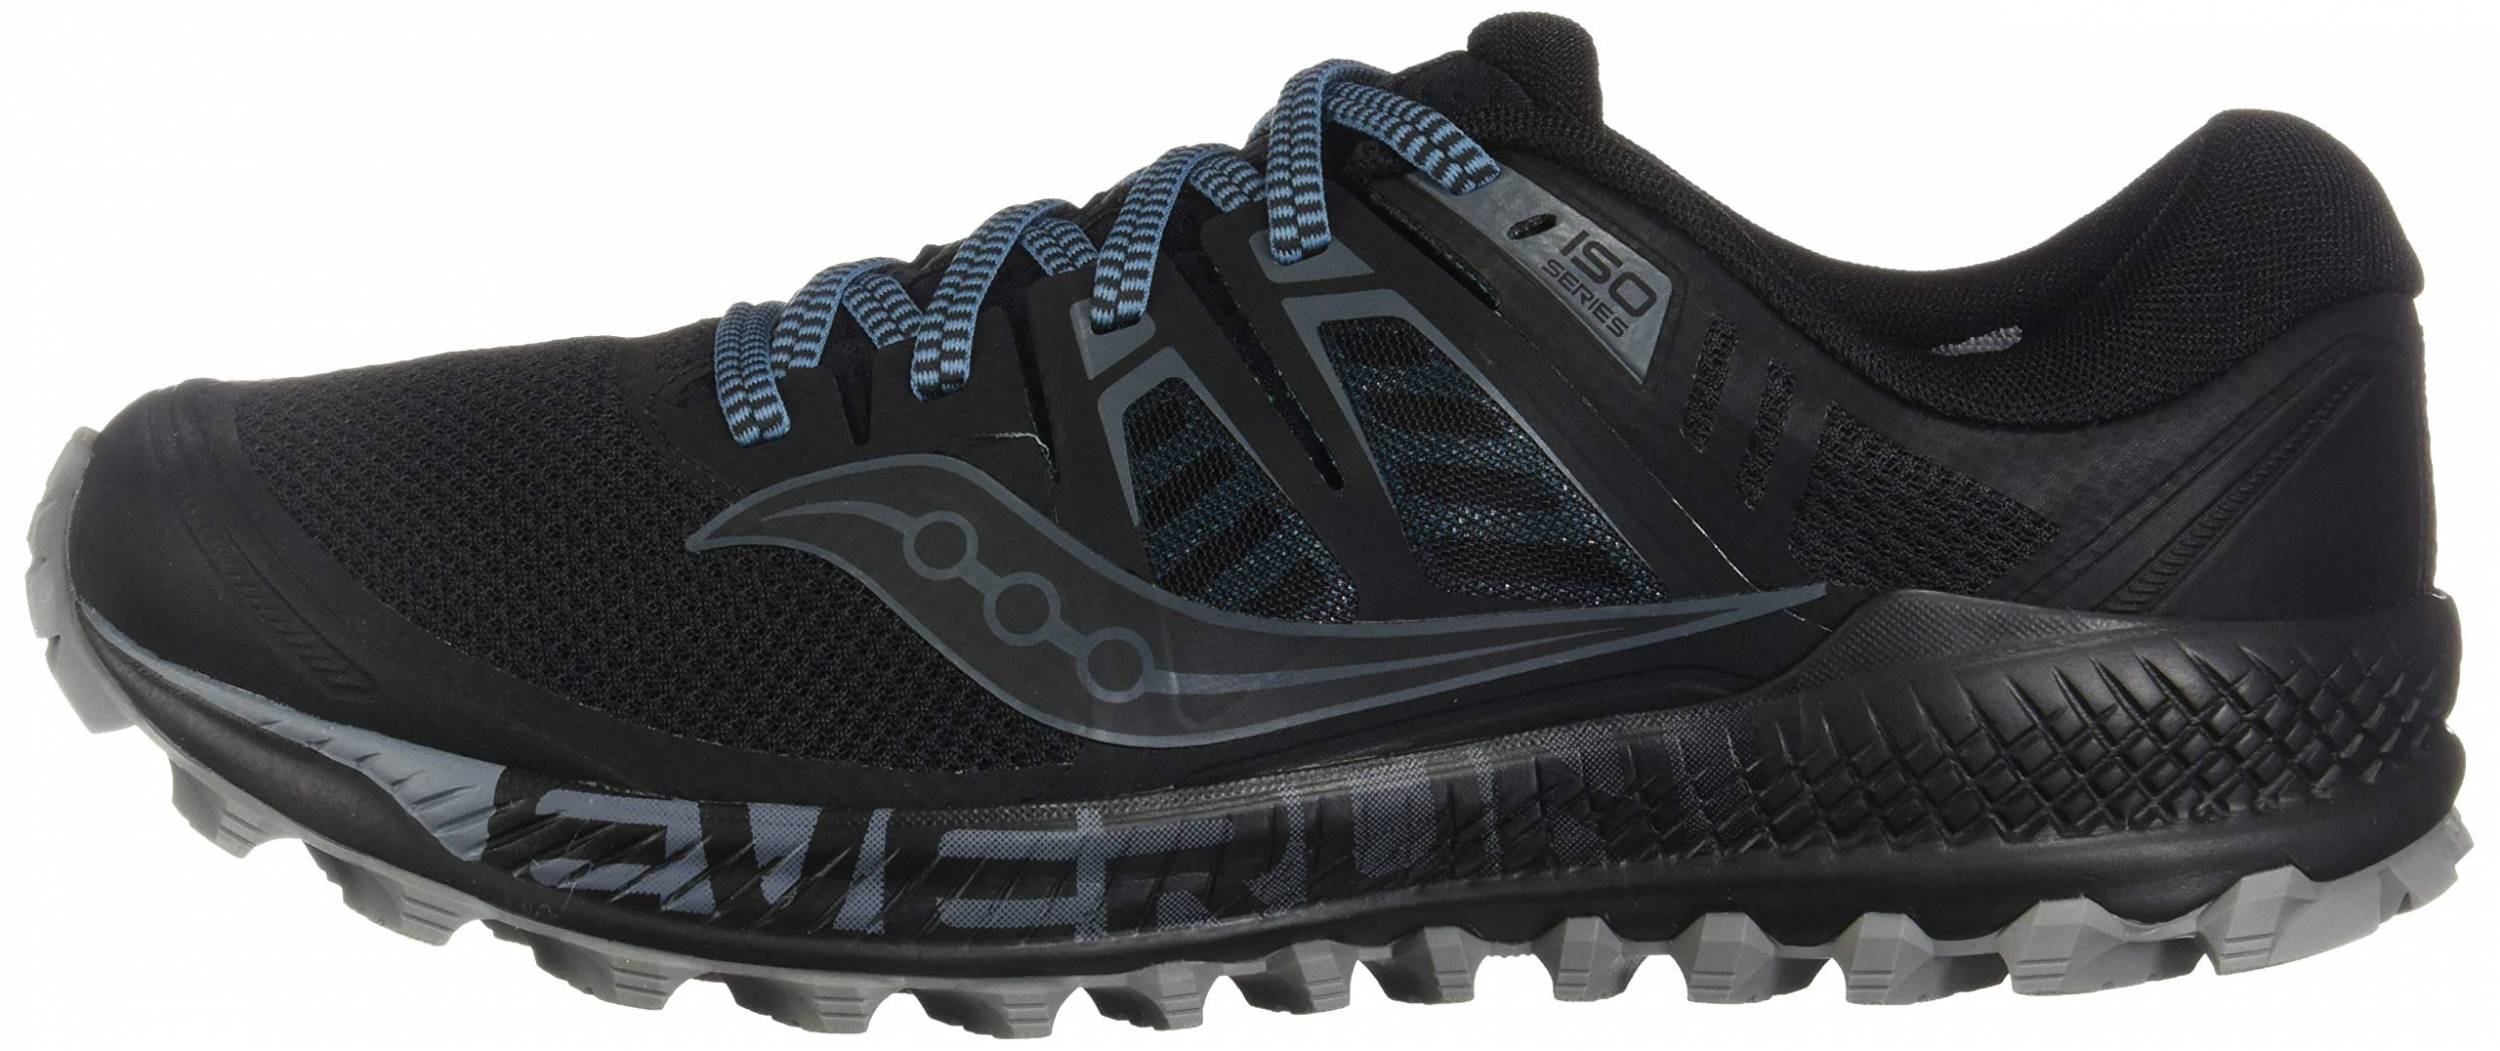 Save 33% on Wide Saucony Running Shoes 